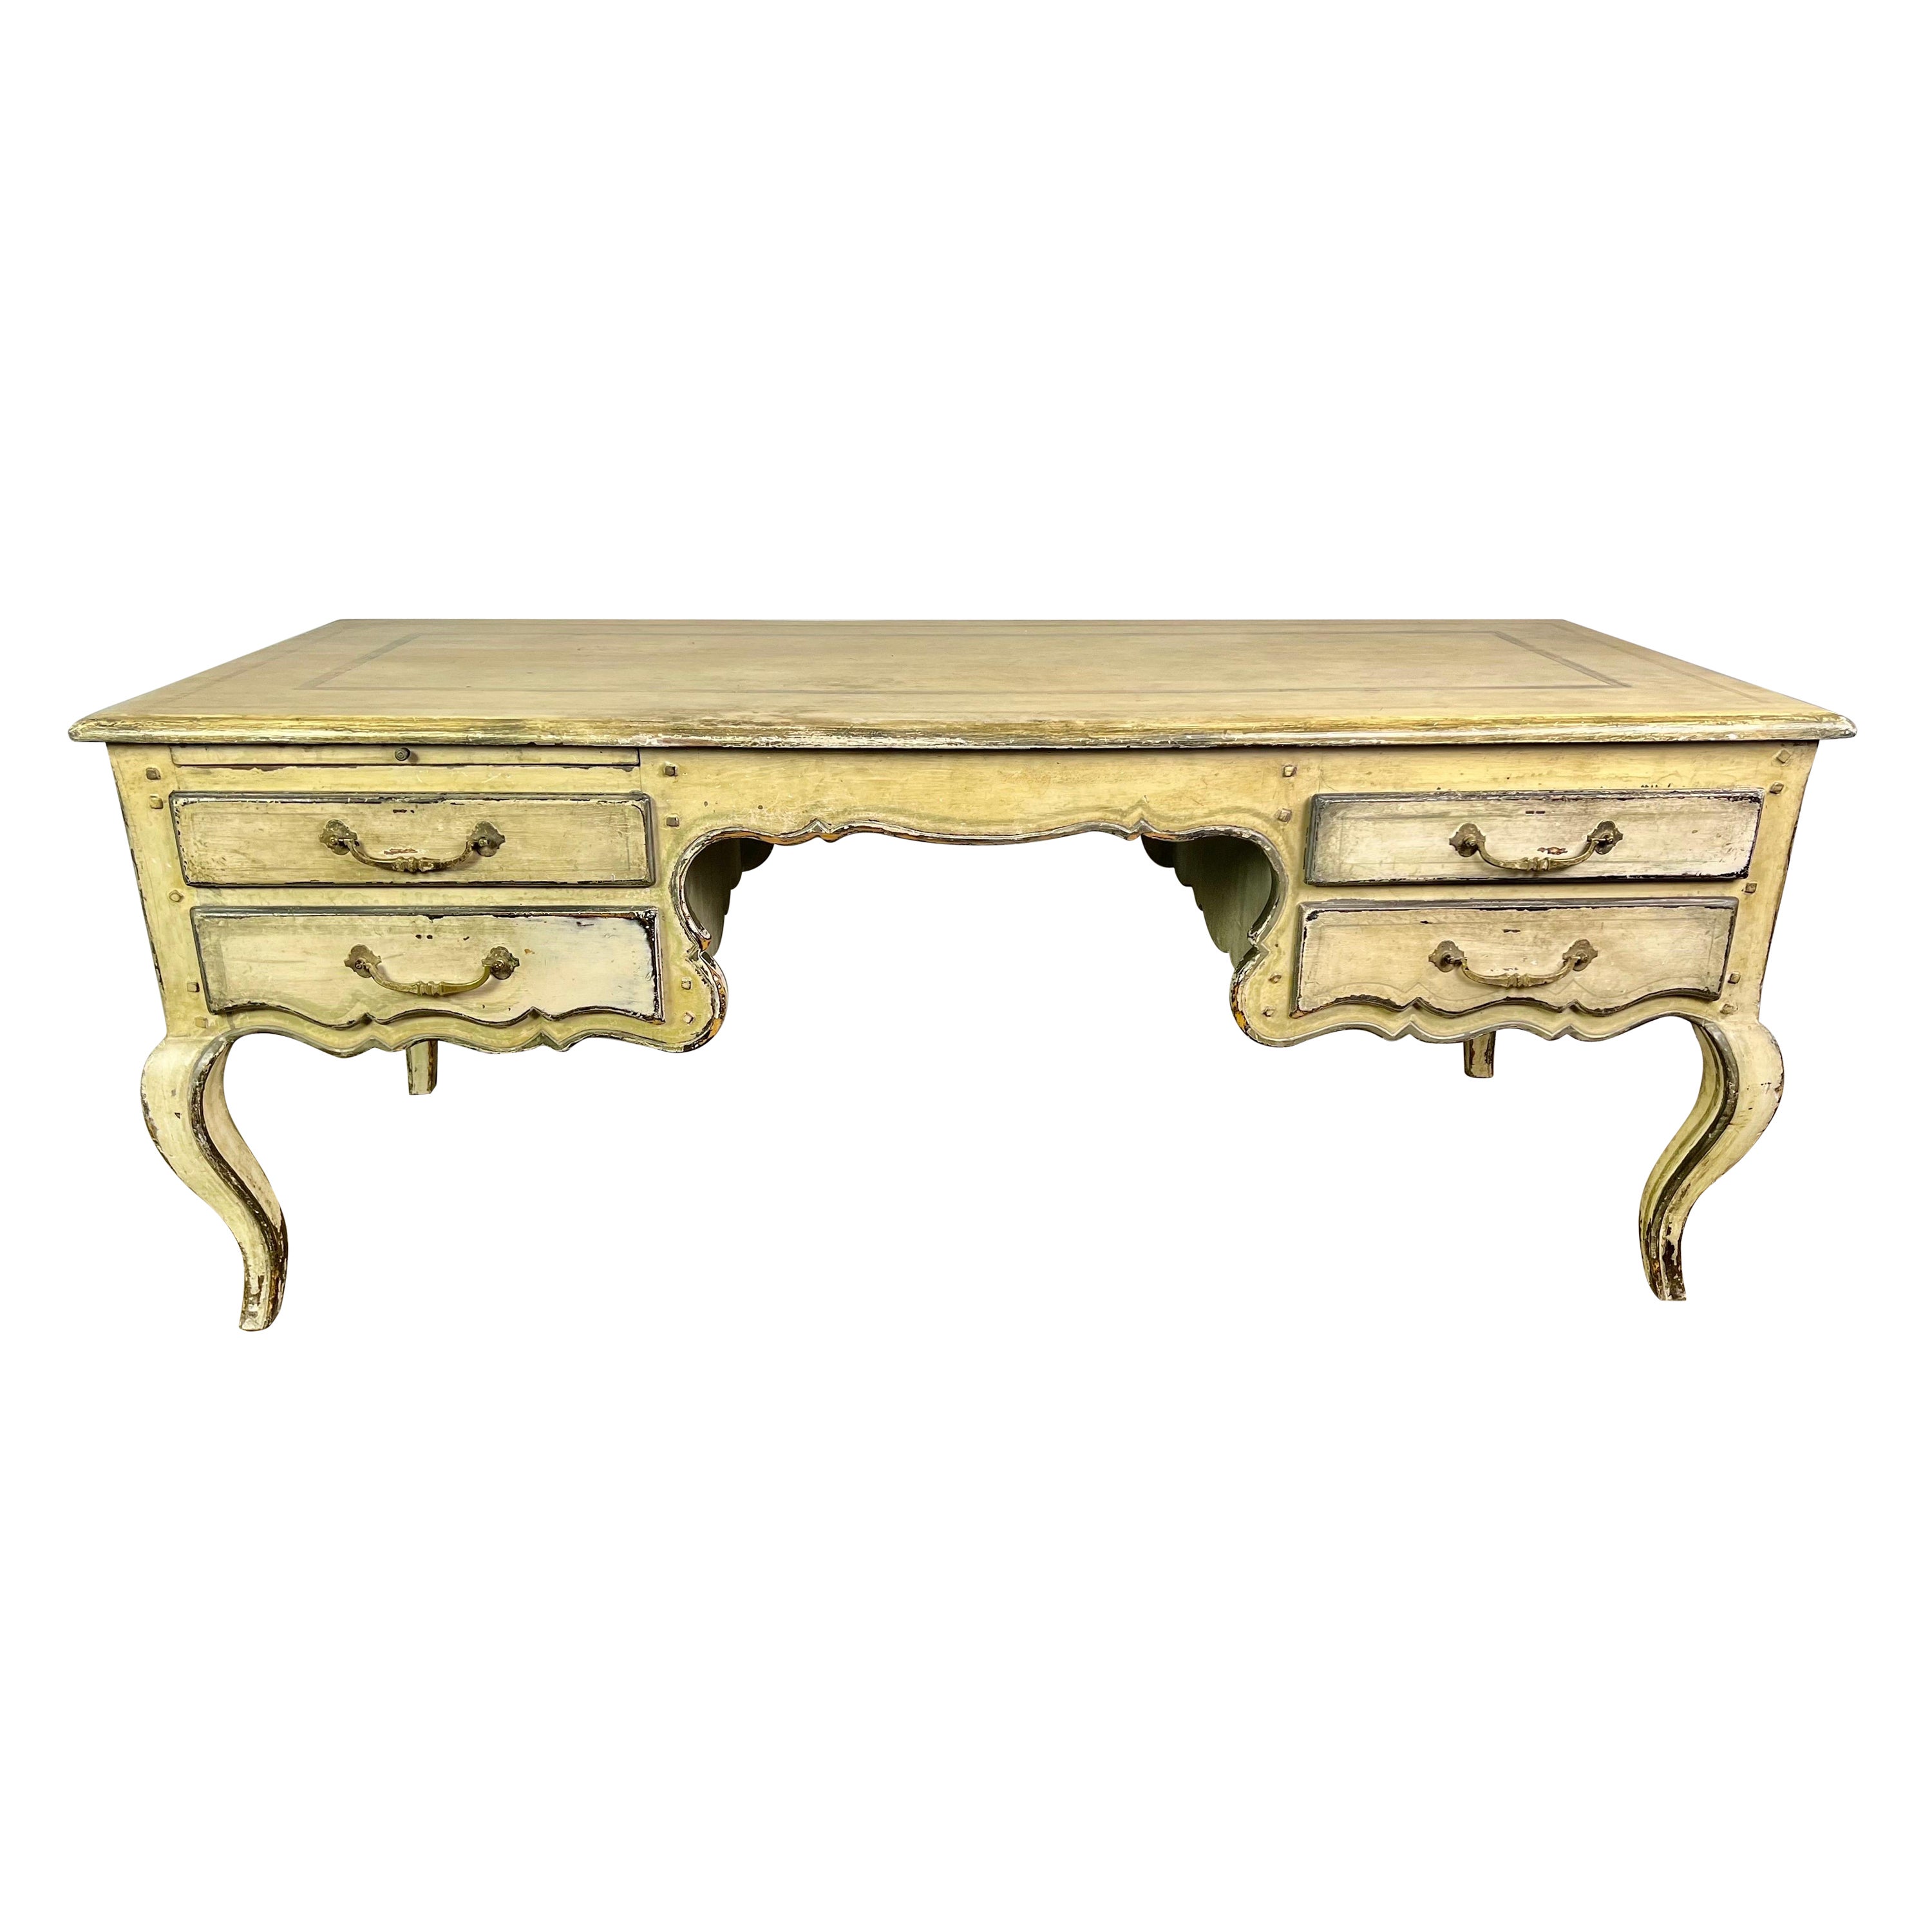 French Provincial Writing Desk 1930s